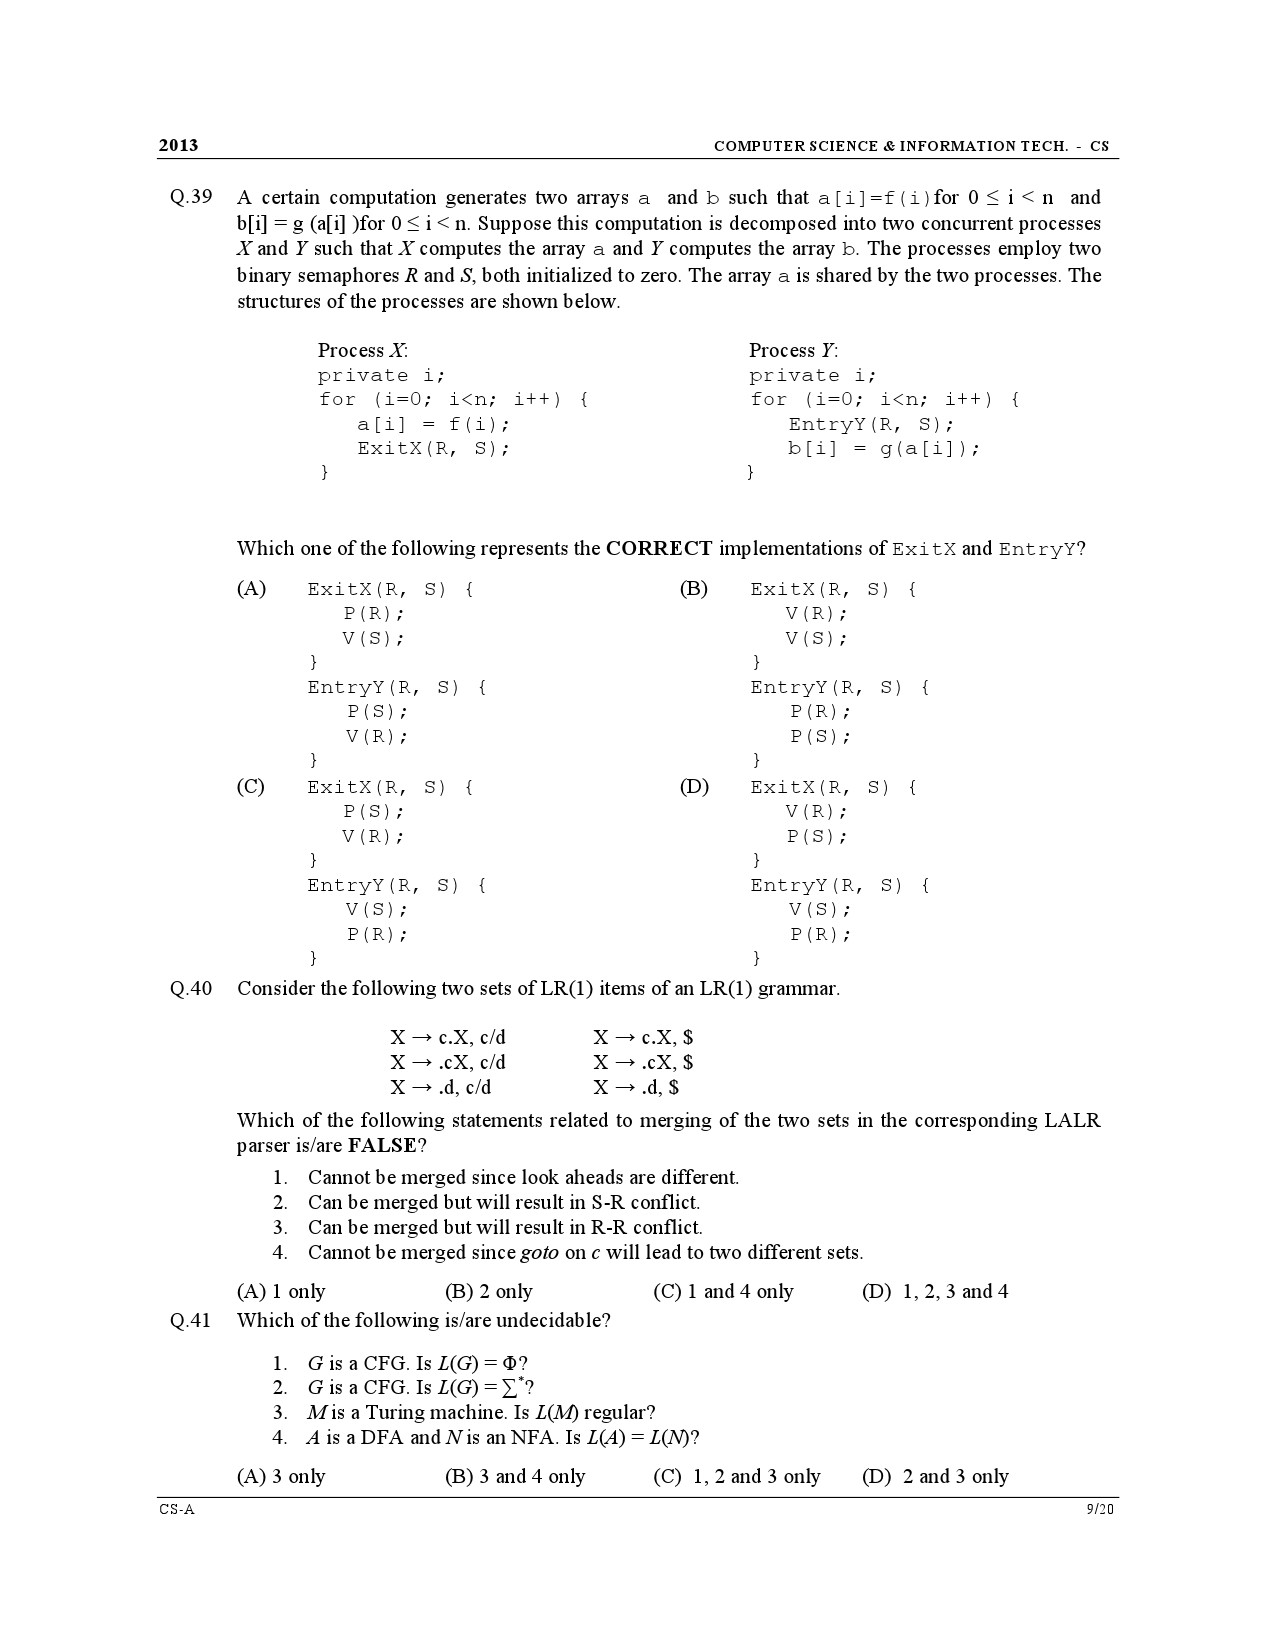 GATE Exam Question Paper 2013 Computer Science and Information Technology 9